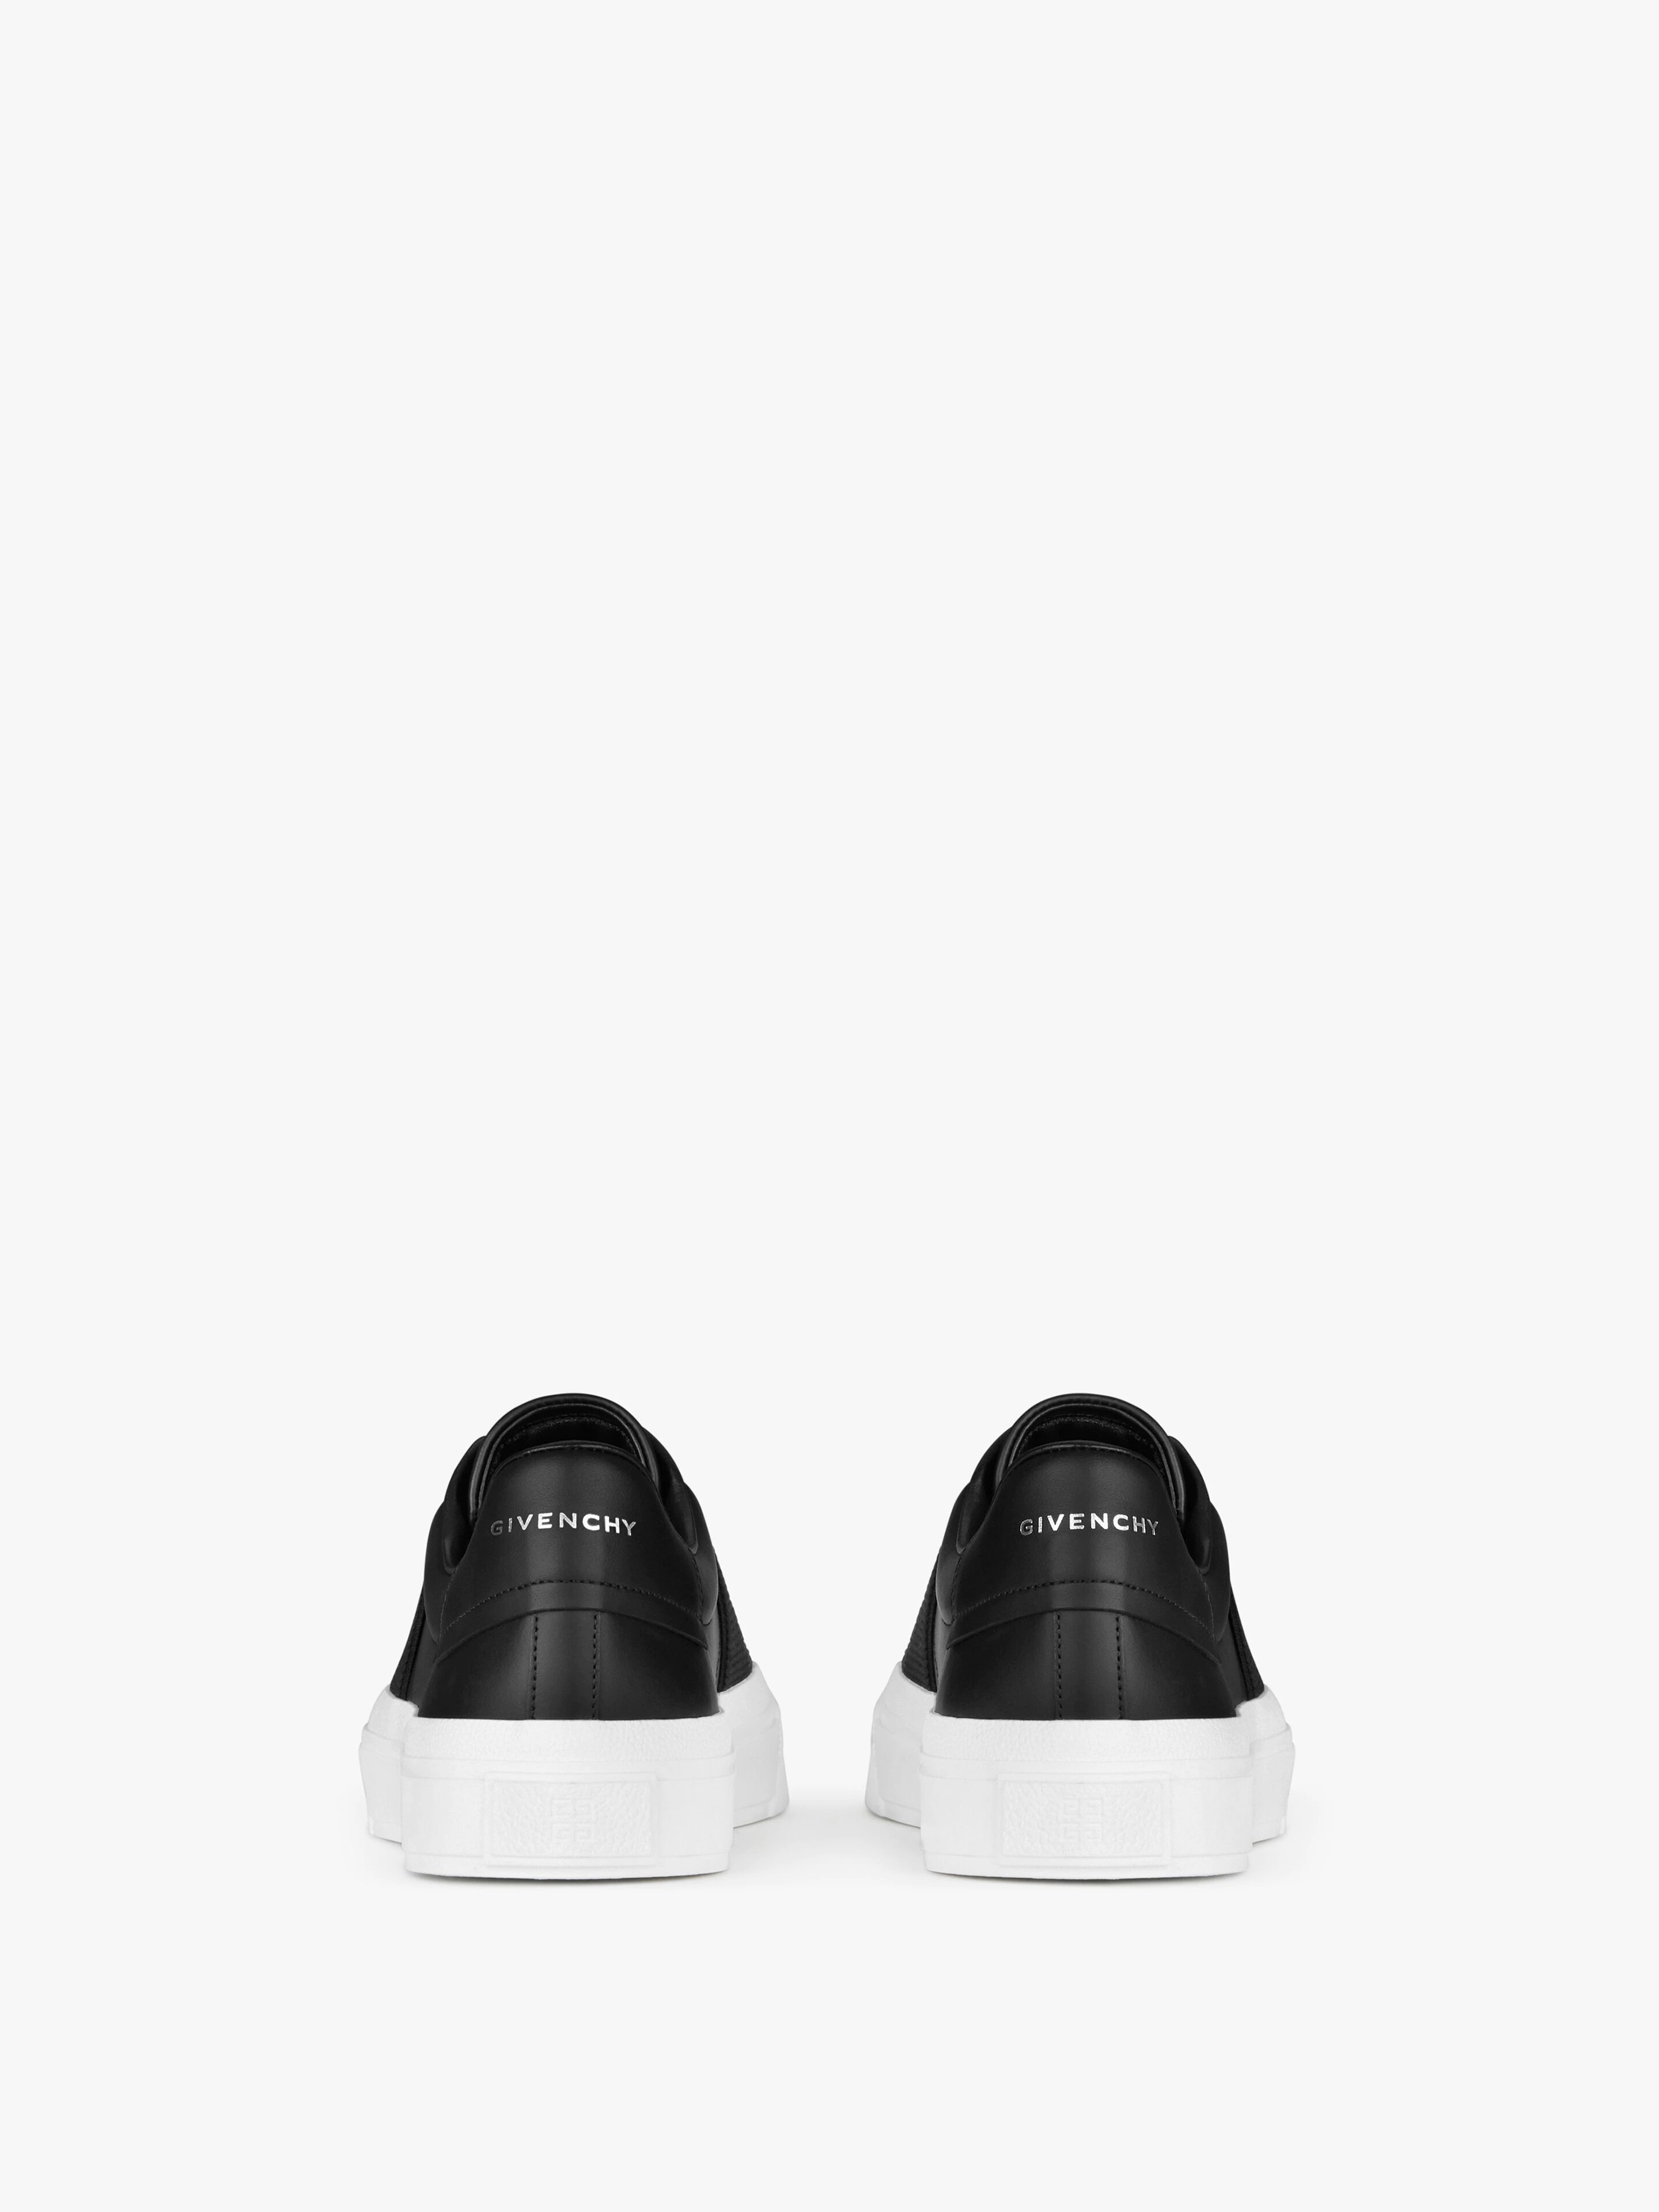 CITY SPORT SNEAKERS IN LEATHER WITH GIVENCHY STRAP - 7